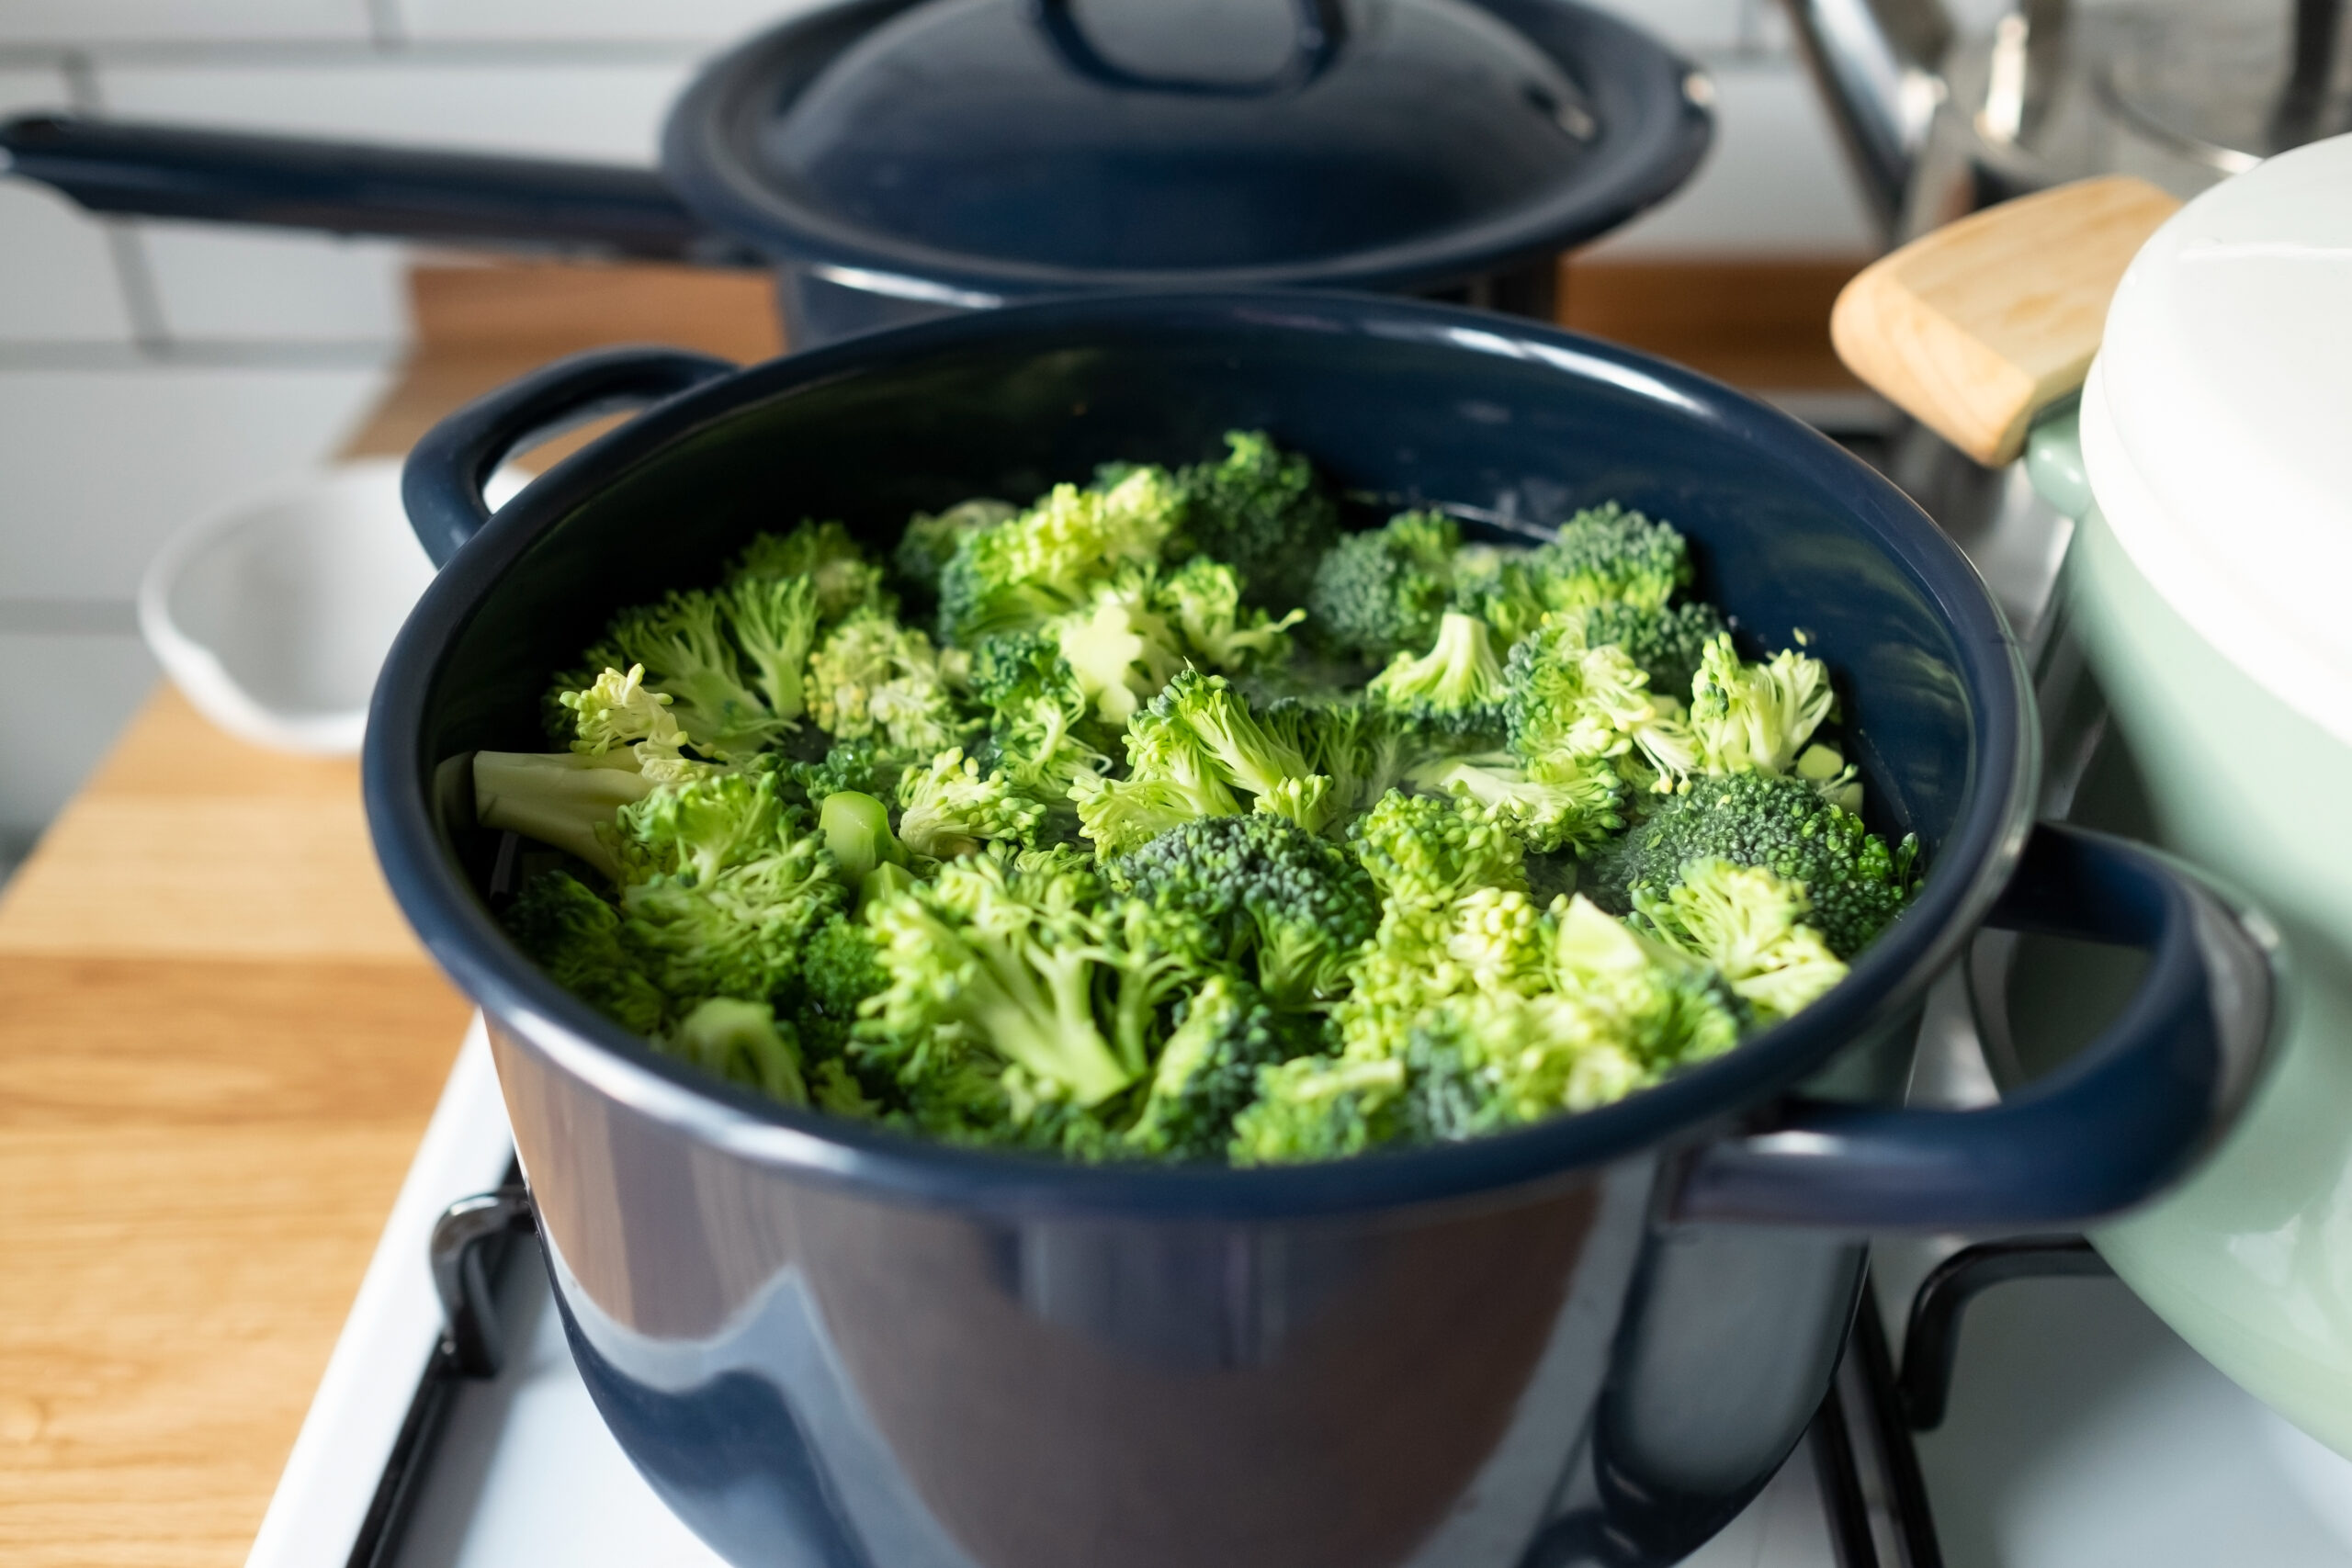 How To Cook Broccoli In Air Fryer